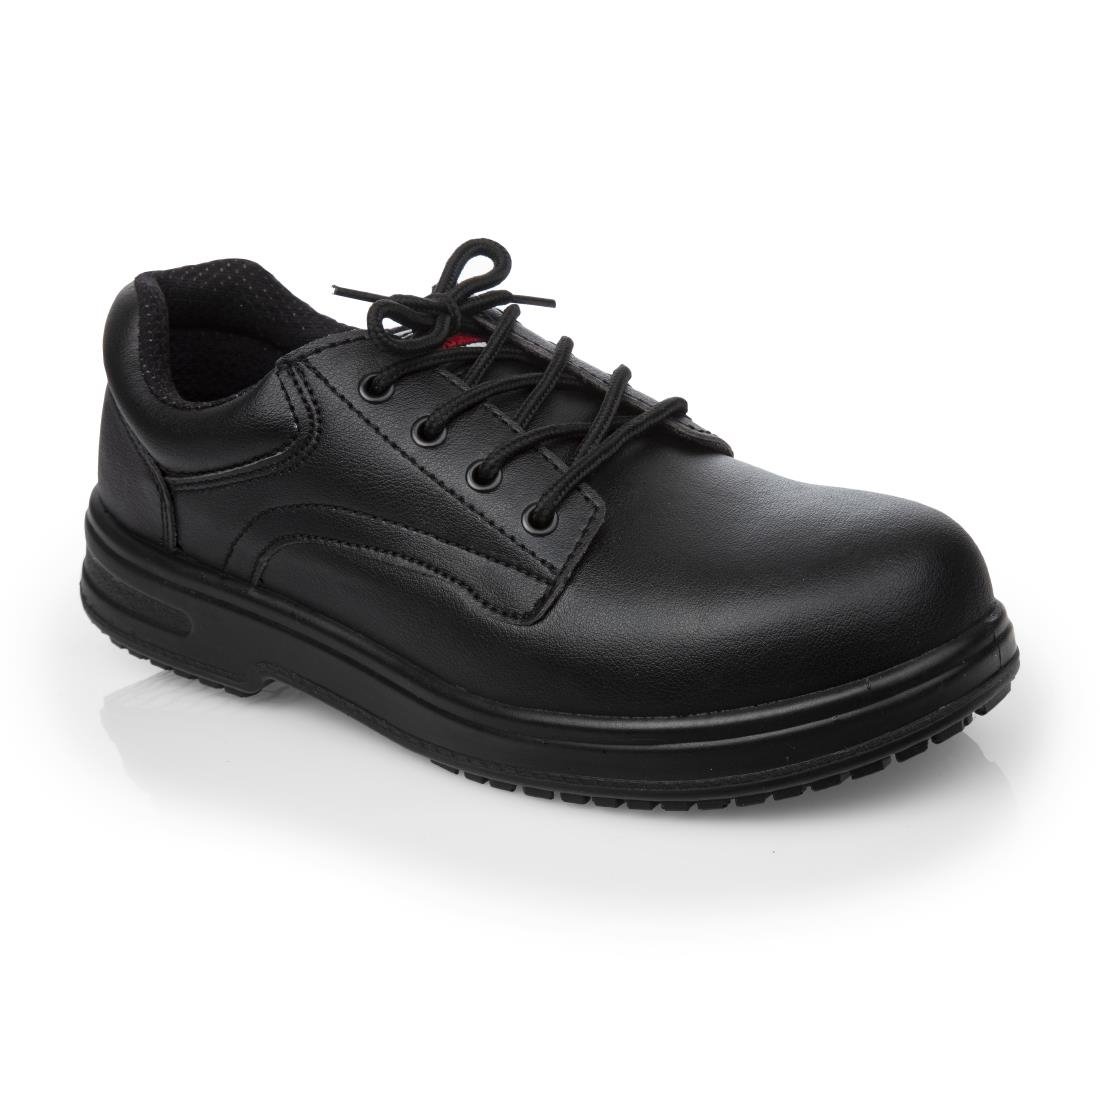 BB497-47 Slipbuster Basic Toe Cap Safety Shoes Black 47 JD Catering Equipment Solutions Ltd